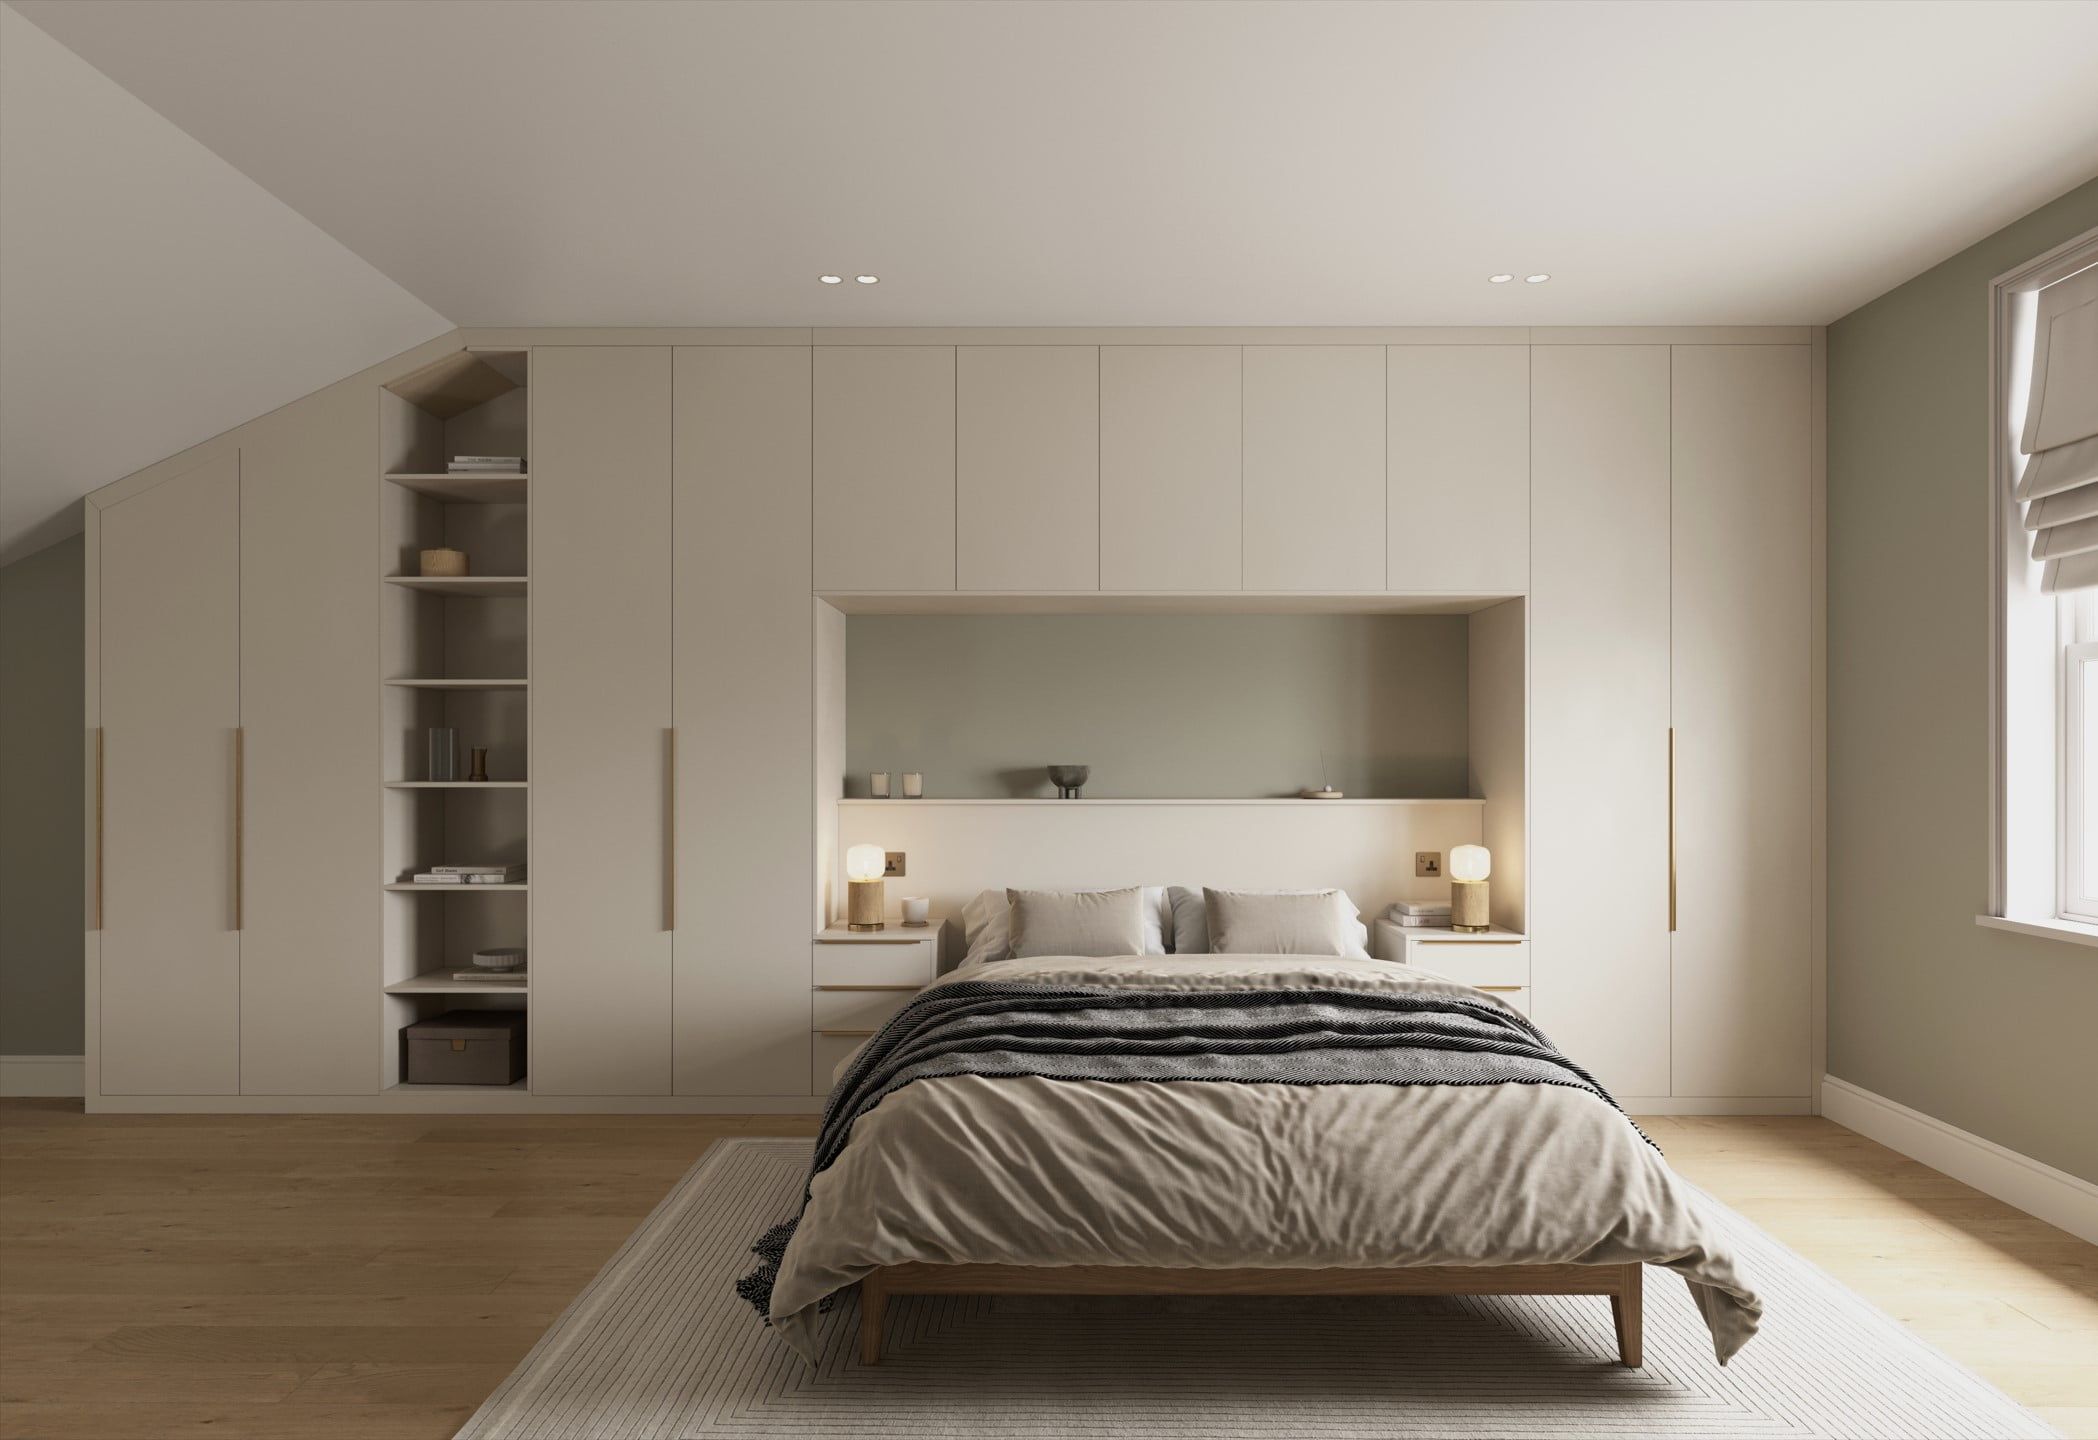 Overbed Fitted Wardrobes And Storage Units, Bespoke Overhead Storage Intended For Bedroom Wardrobes Storages (Photo 10 of 15)